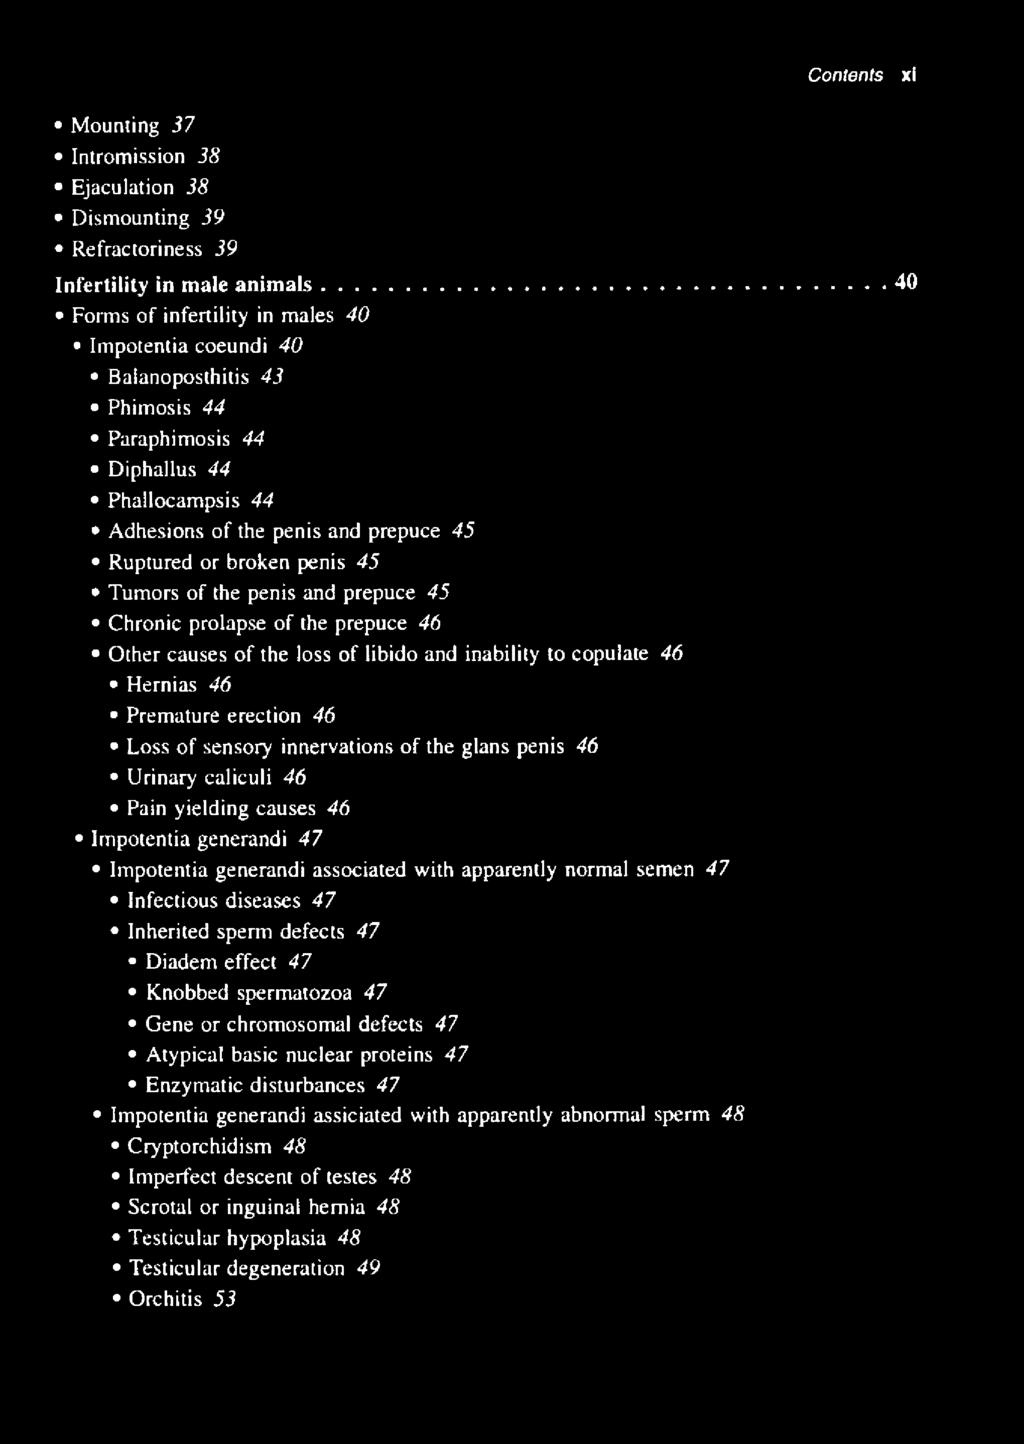 45 Tumors of the penis and prepuce 45 Chronic prolapse of the prepuce 46 Other causes of the loss of libido and inability to copulate 46 Hernias 46 Premature erection 46 Loss of sensory innervations